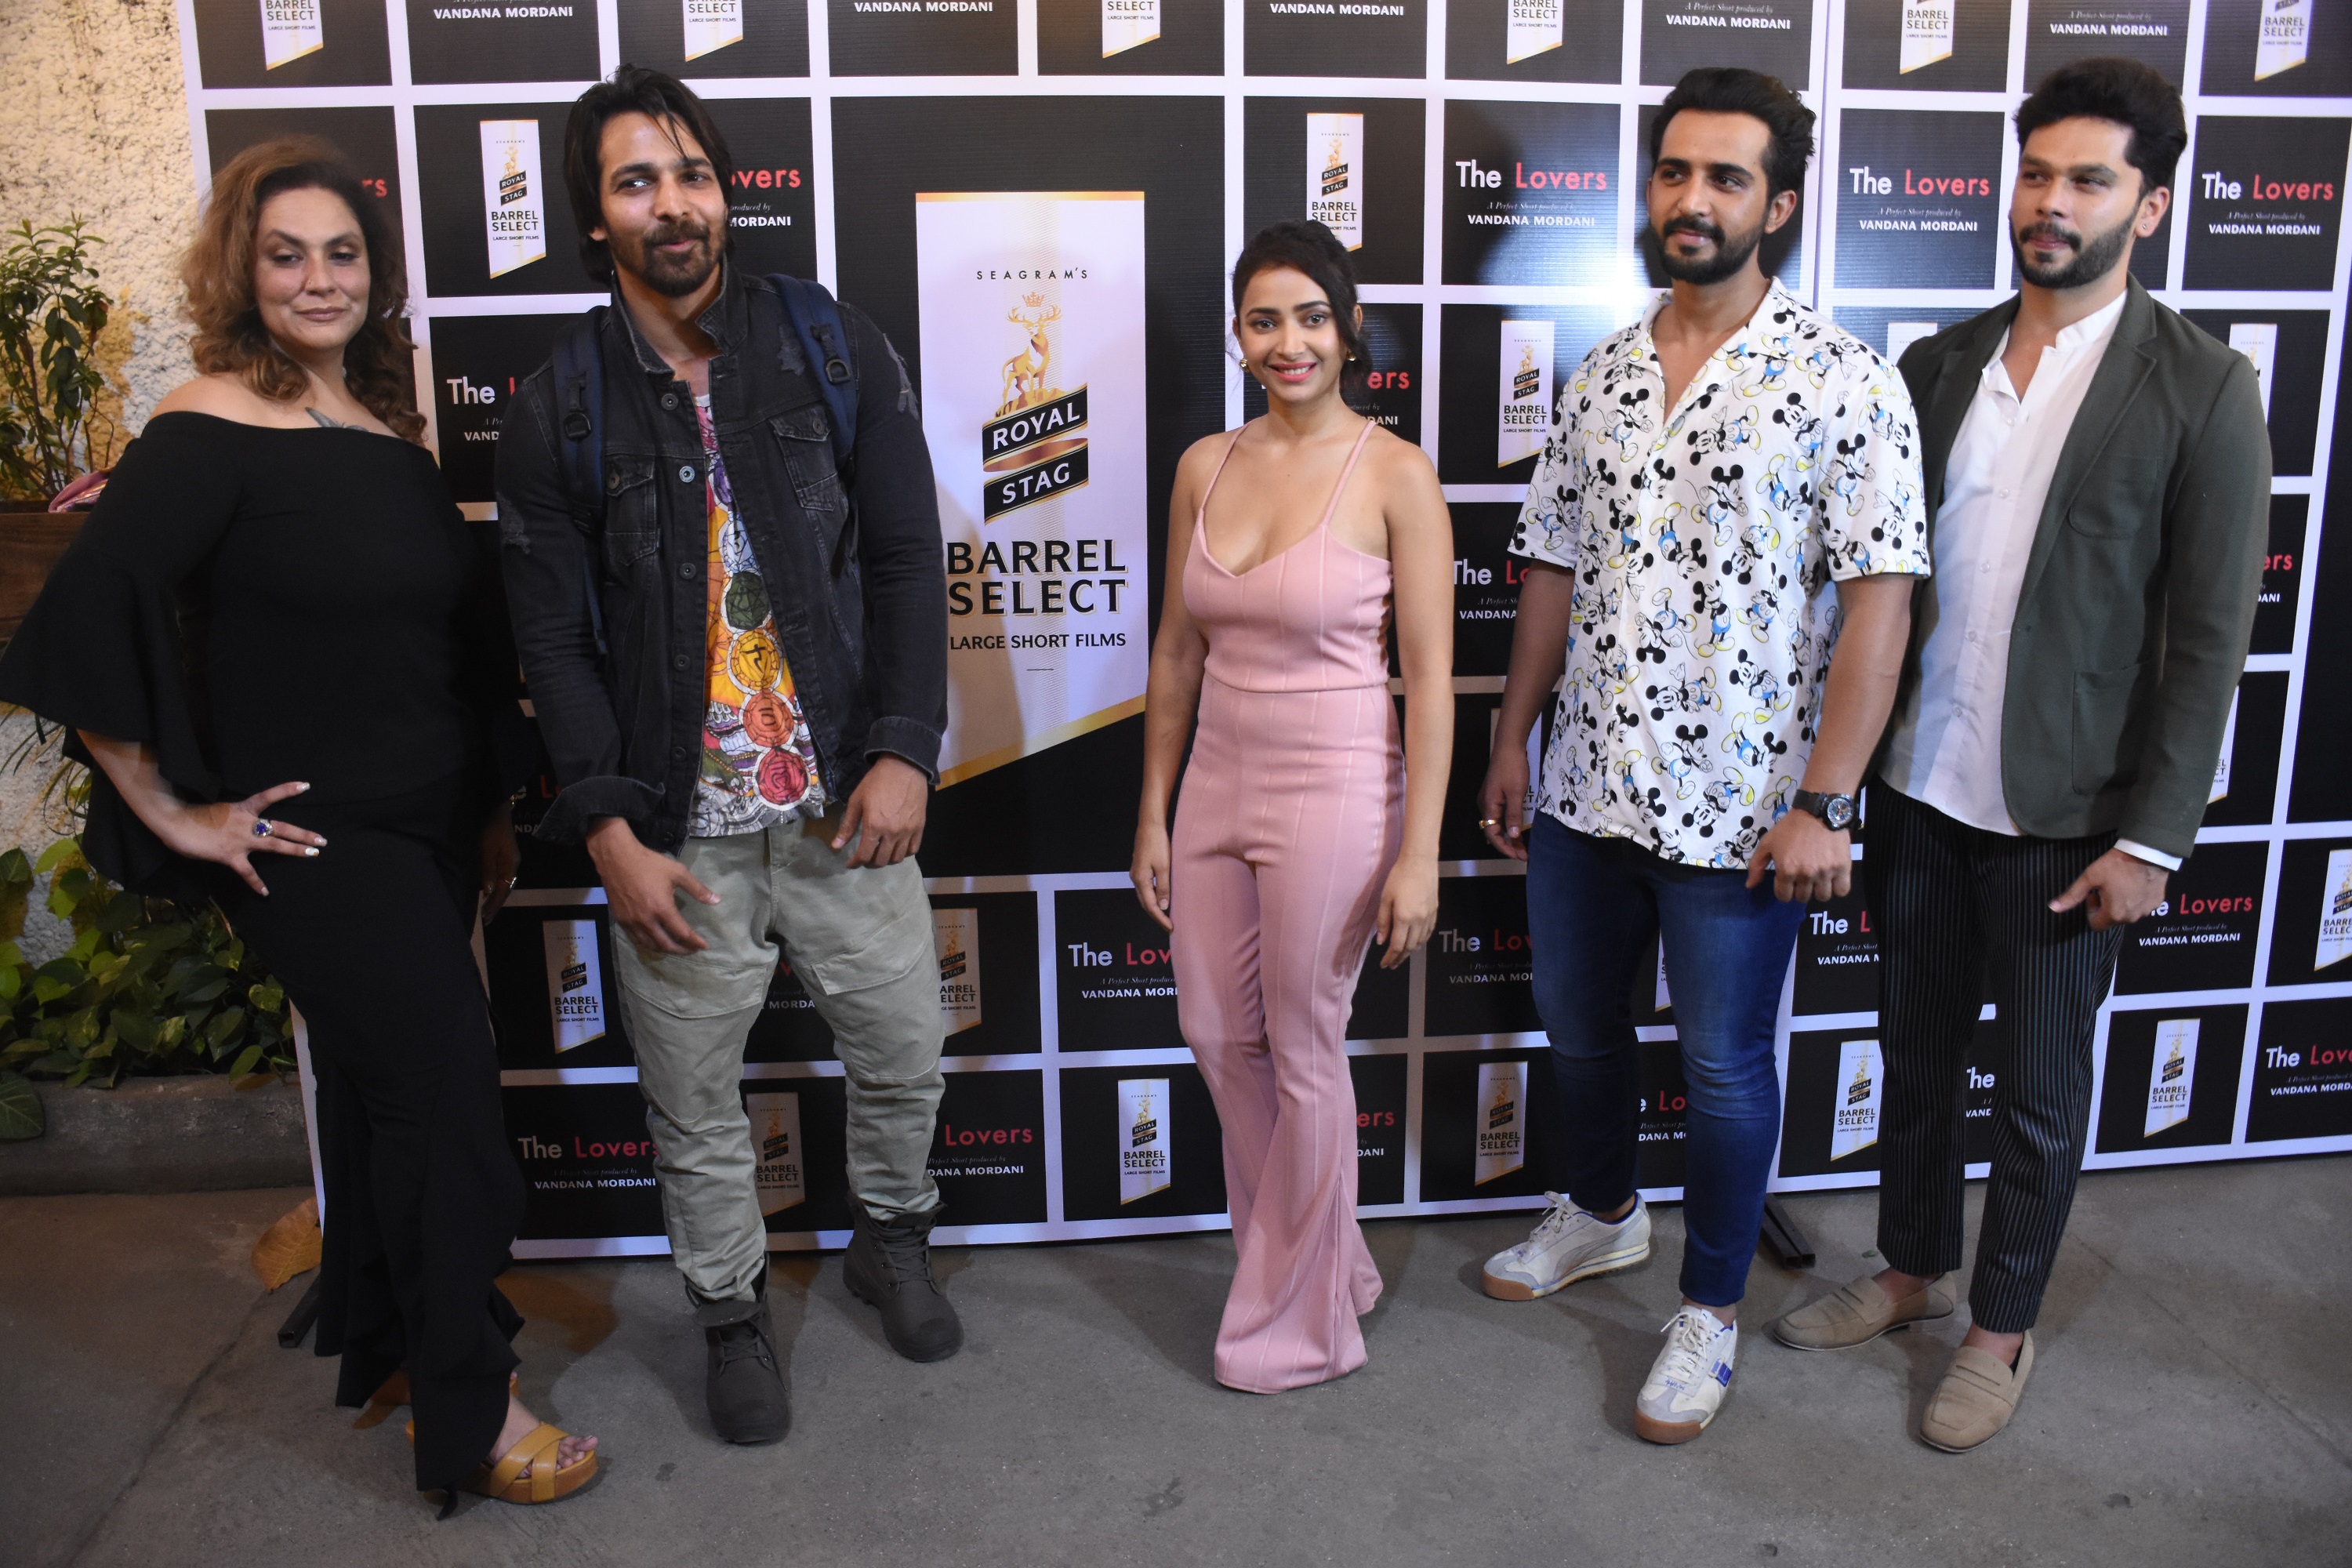 The Lovers starcast at premier of the film organized by Royal Stag Barrel Select Large Short Films.